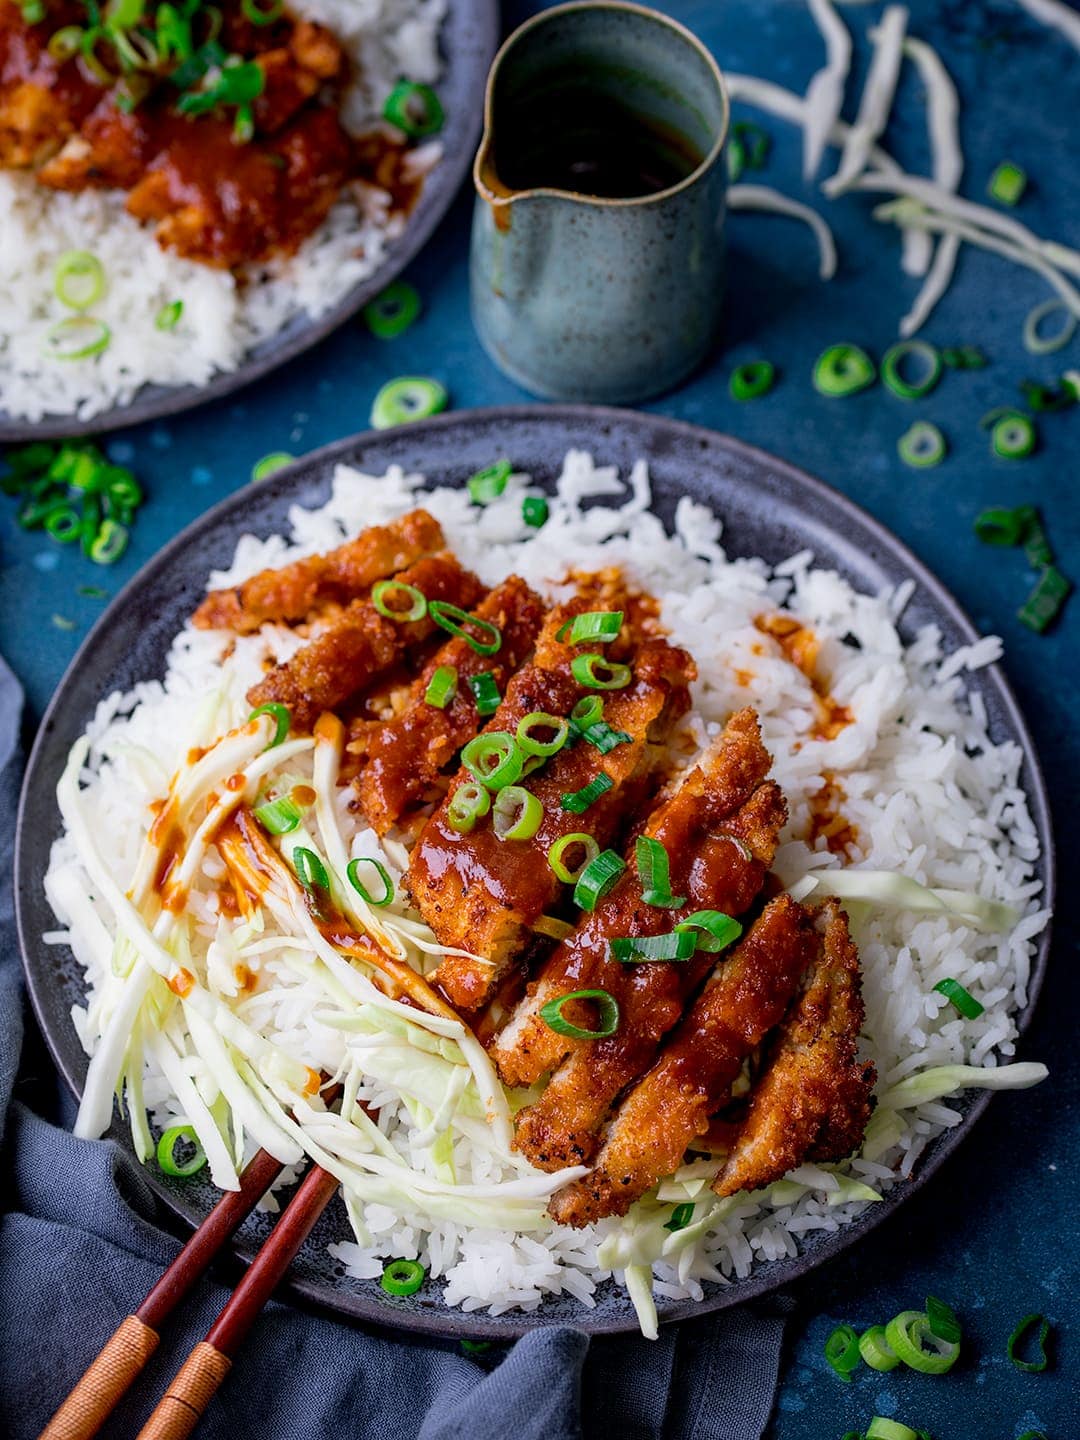 Tonkatsu pork curry on a dark plate with rice and cabbage